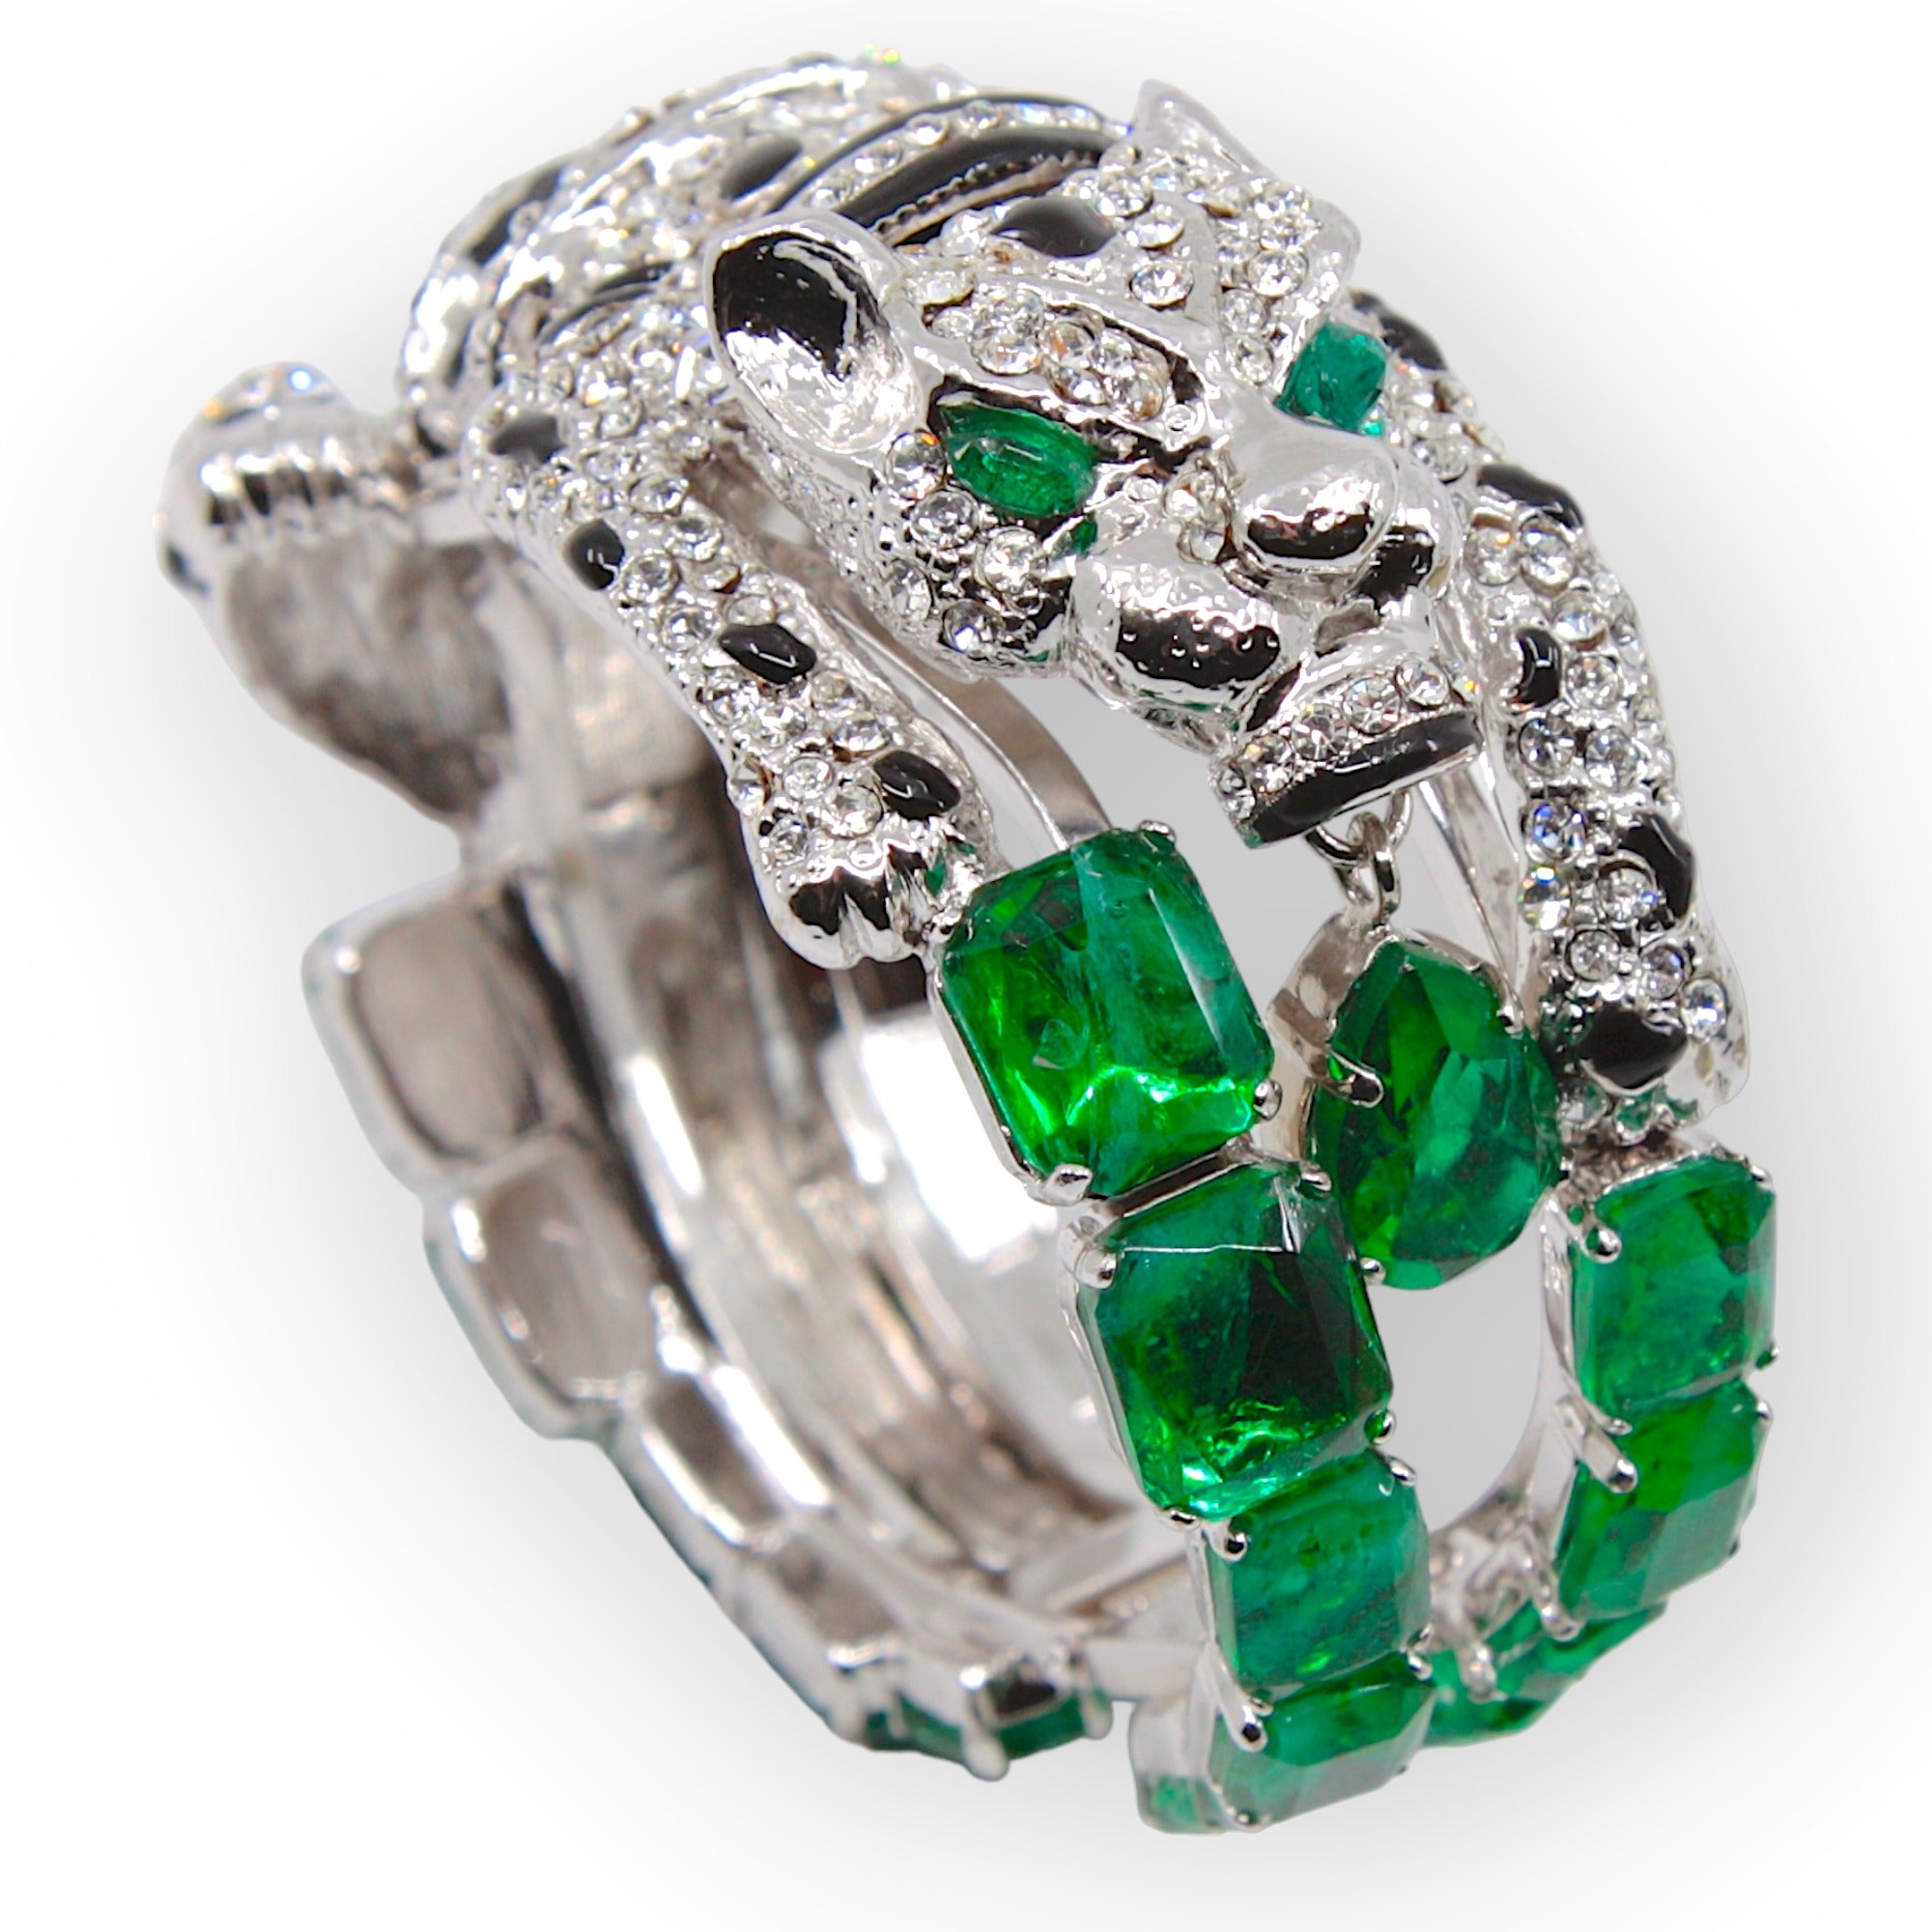 Luxurious Swarovski® crystals inform the exclusive design of this remarkable panther bracelet with emerald crystals and enamel, crafted from hypoallergenic rhodium-plated metal. Superior craftsmanship renders each piece one-of-a-kind. These items are skilfully fabricated in Italy with luxurious crystals.